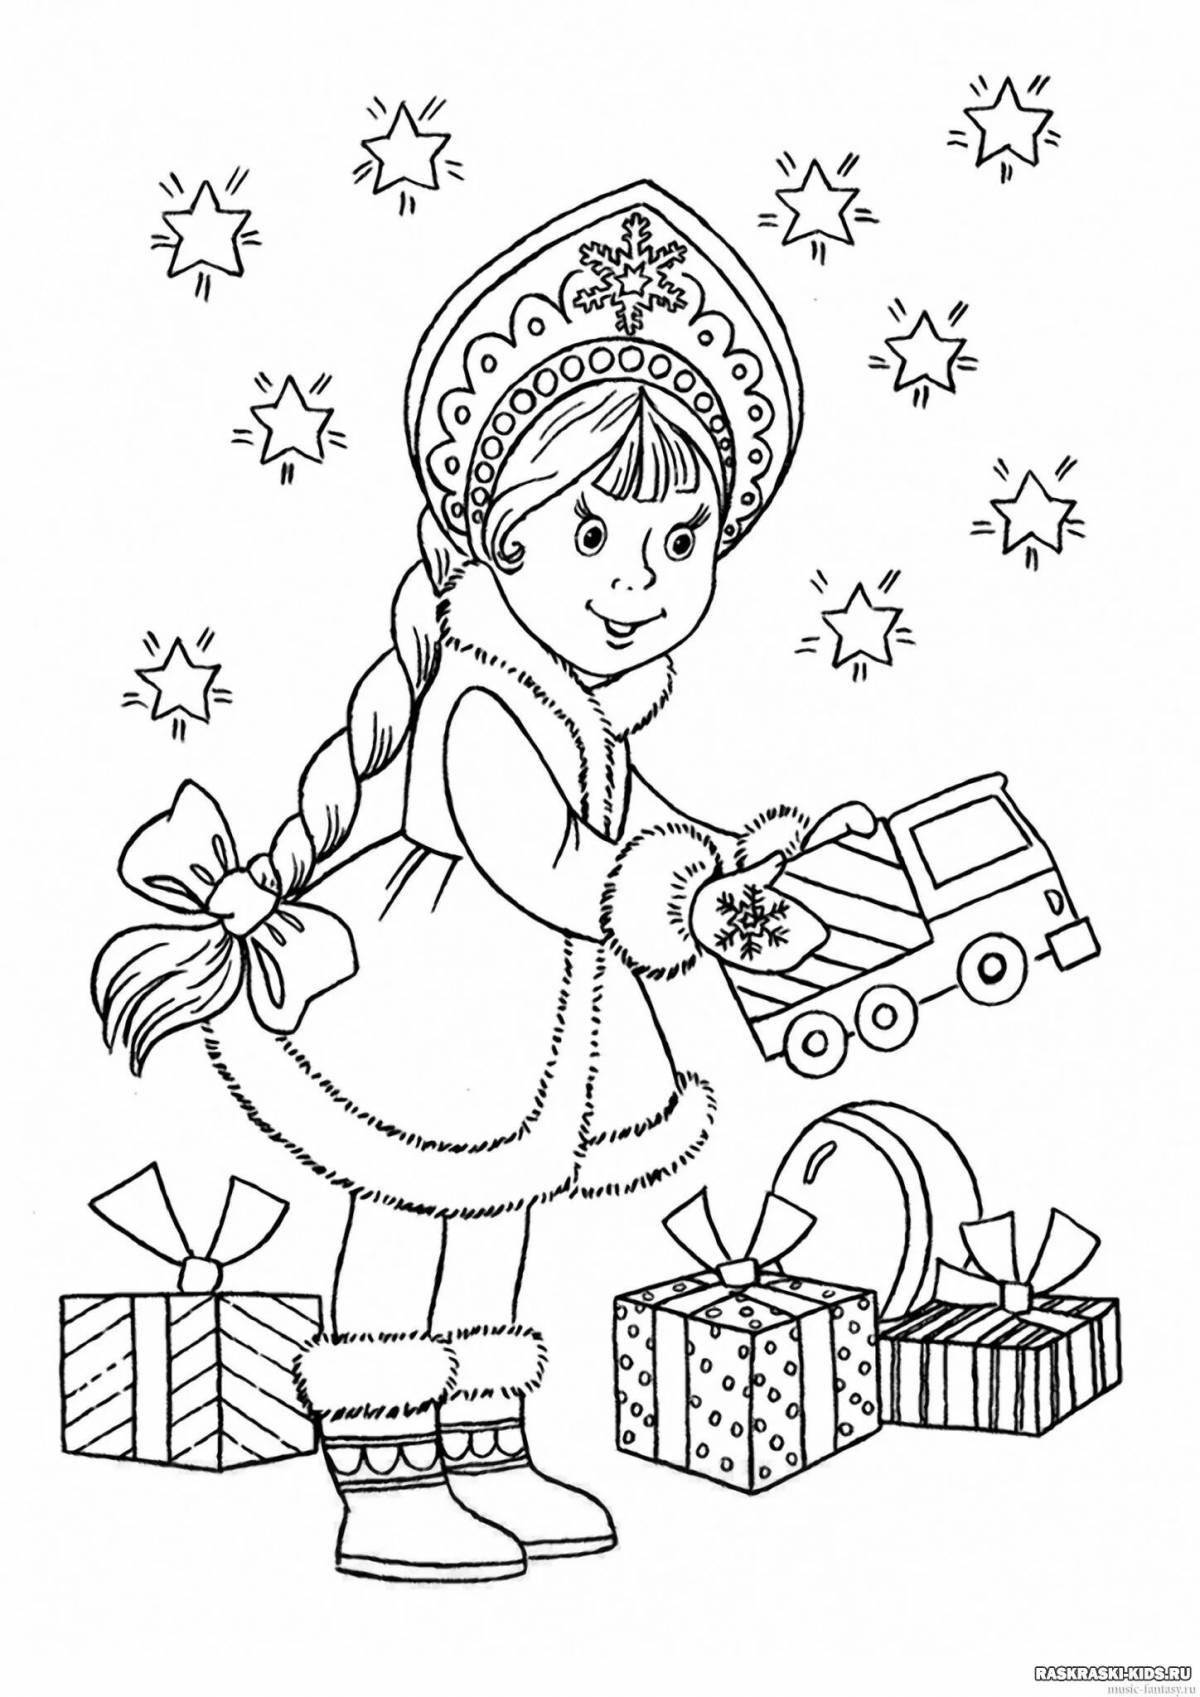 Merry Christmas coloring book for girls 8 years old